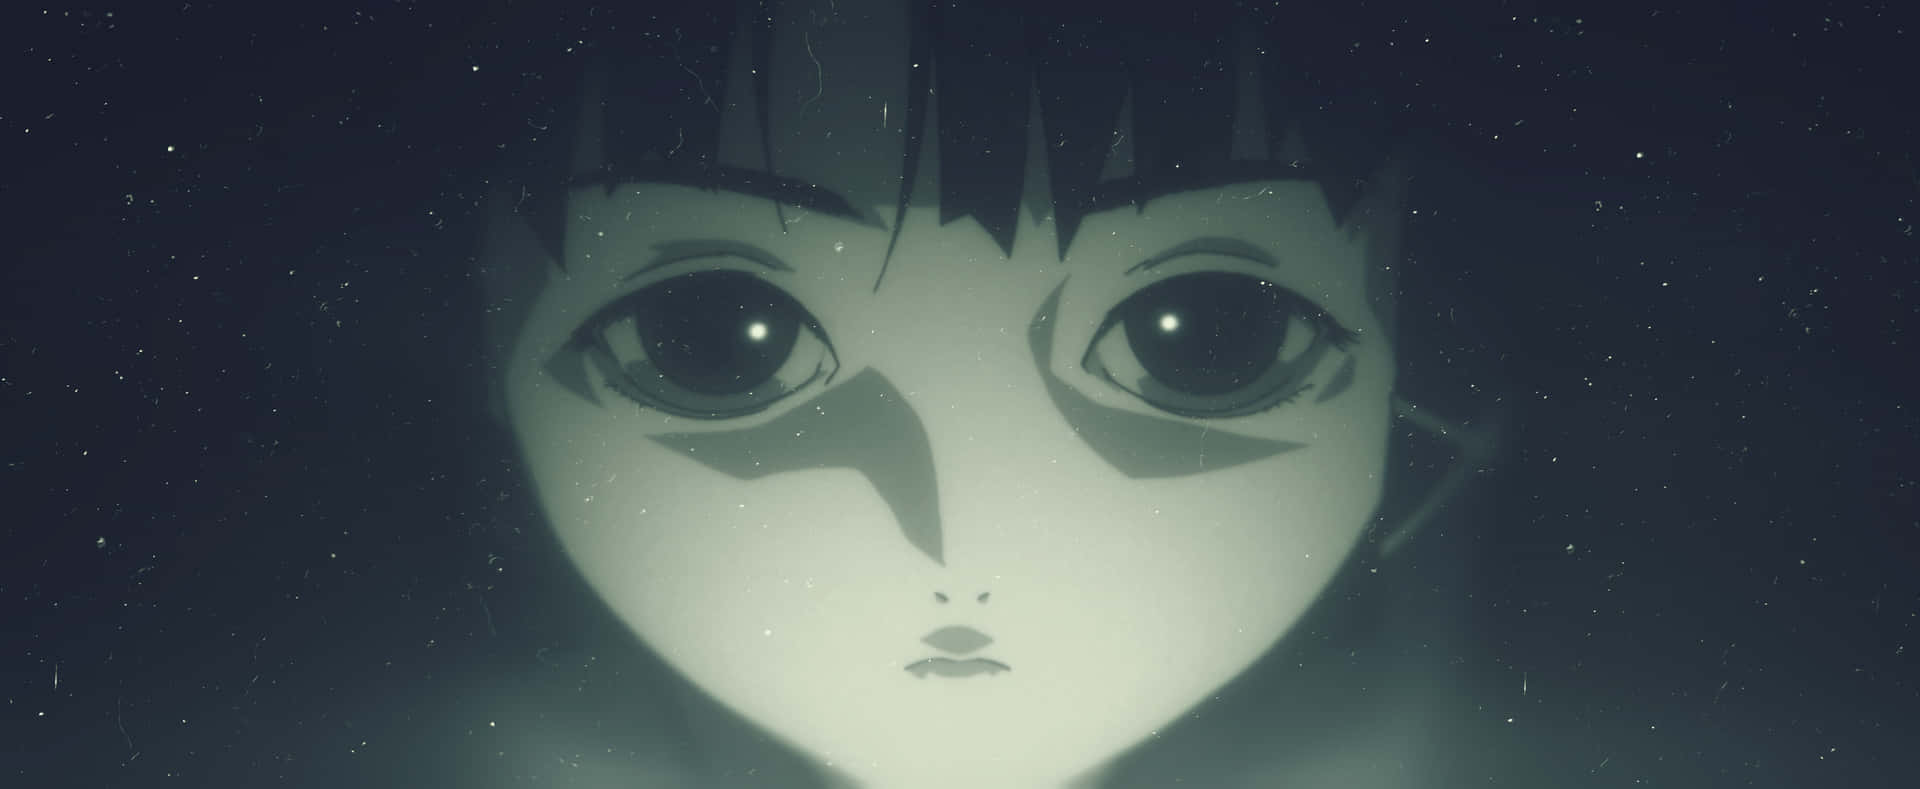 Explore The Digital World With Serial Experiments Lain